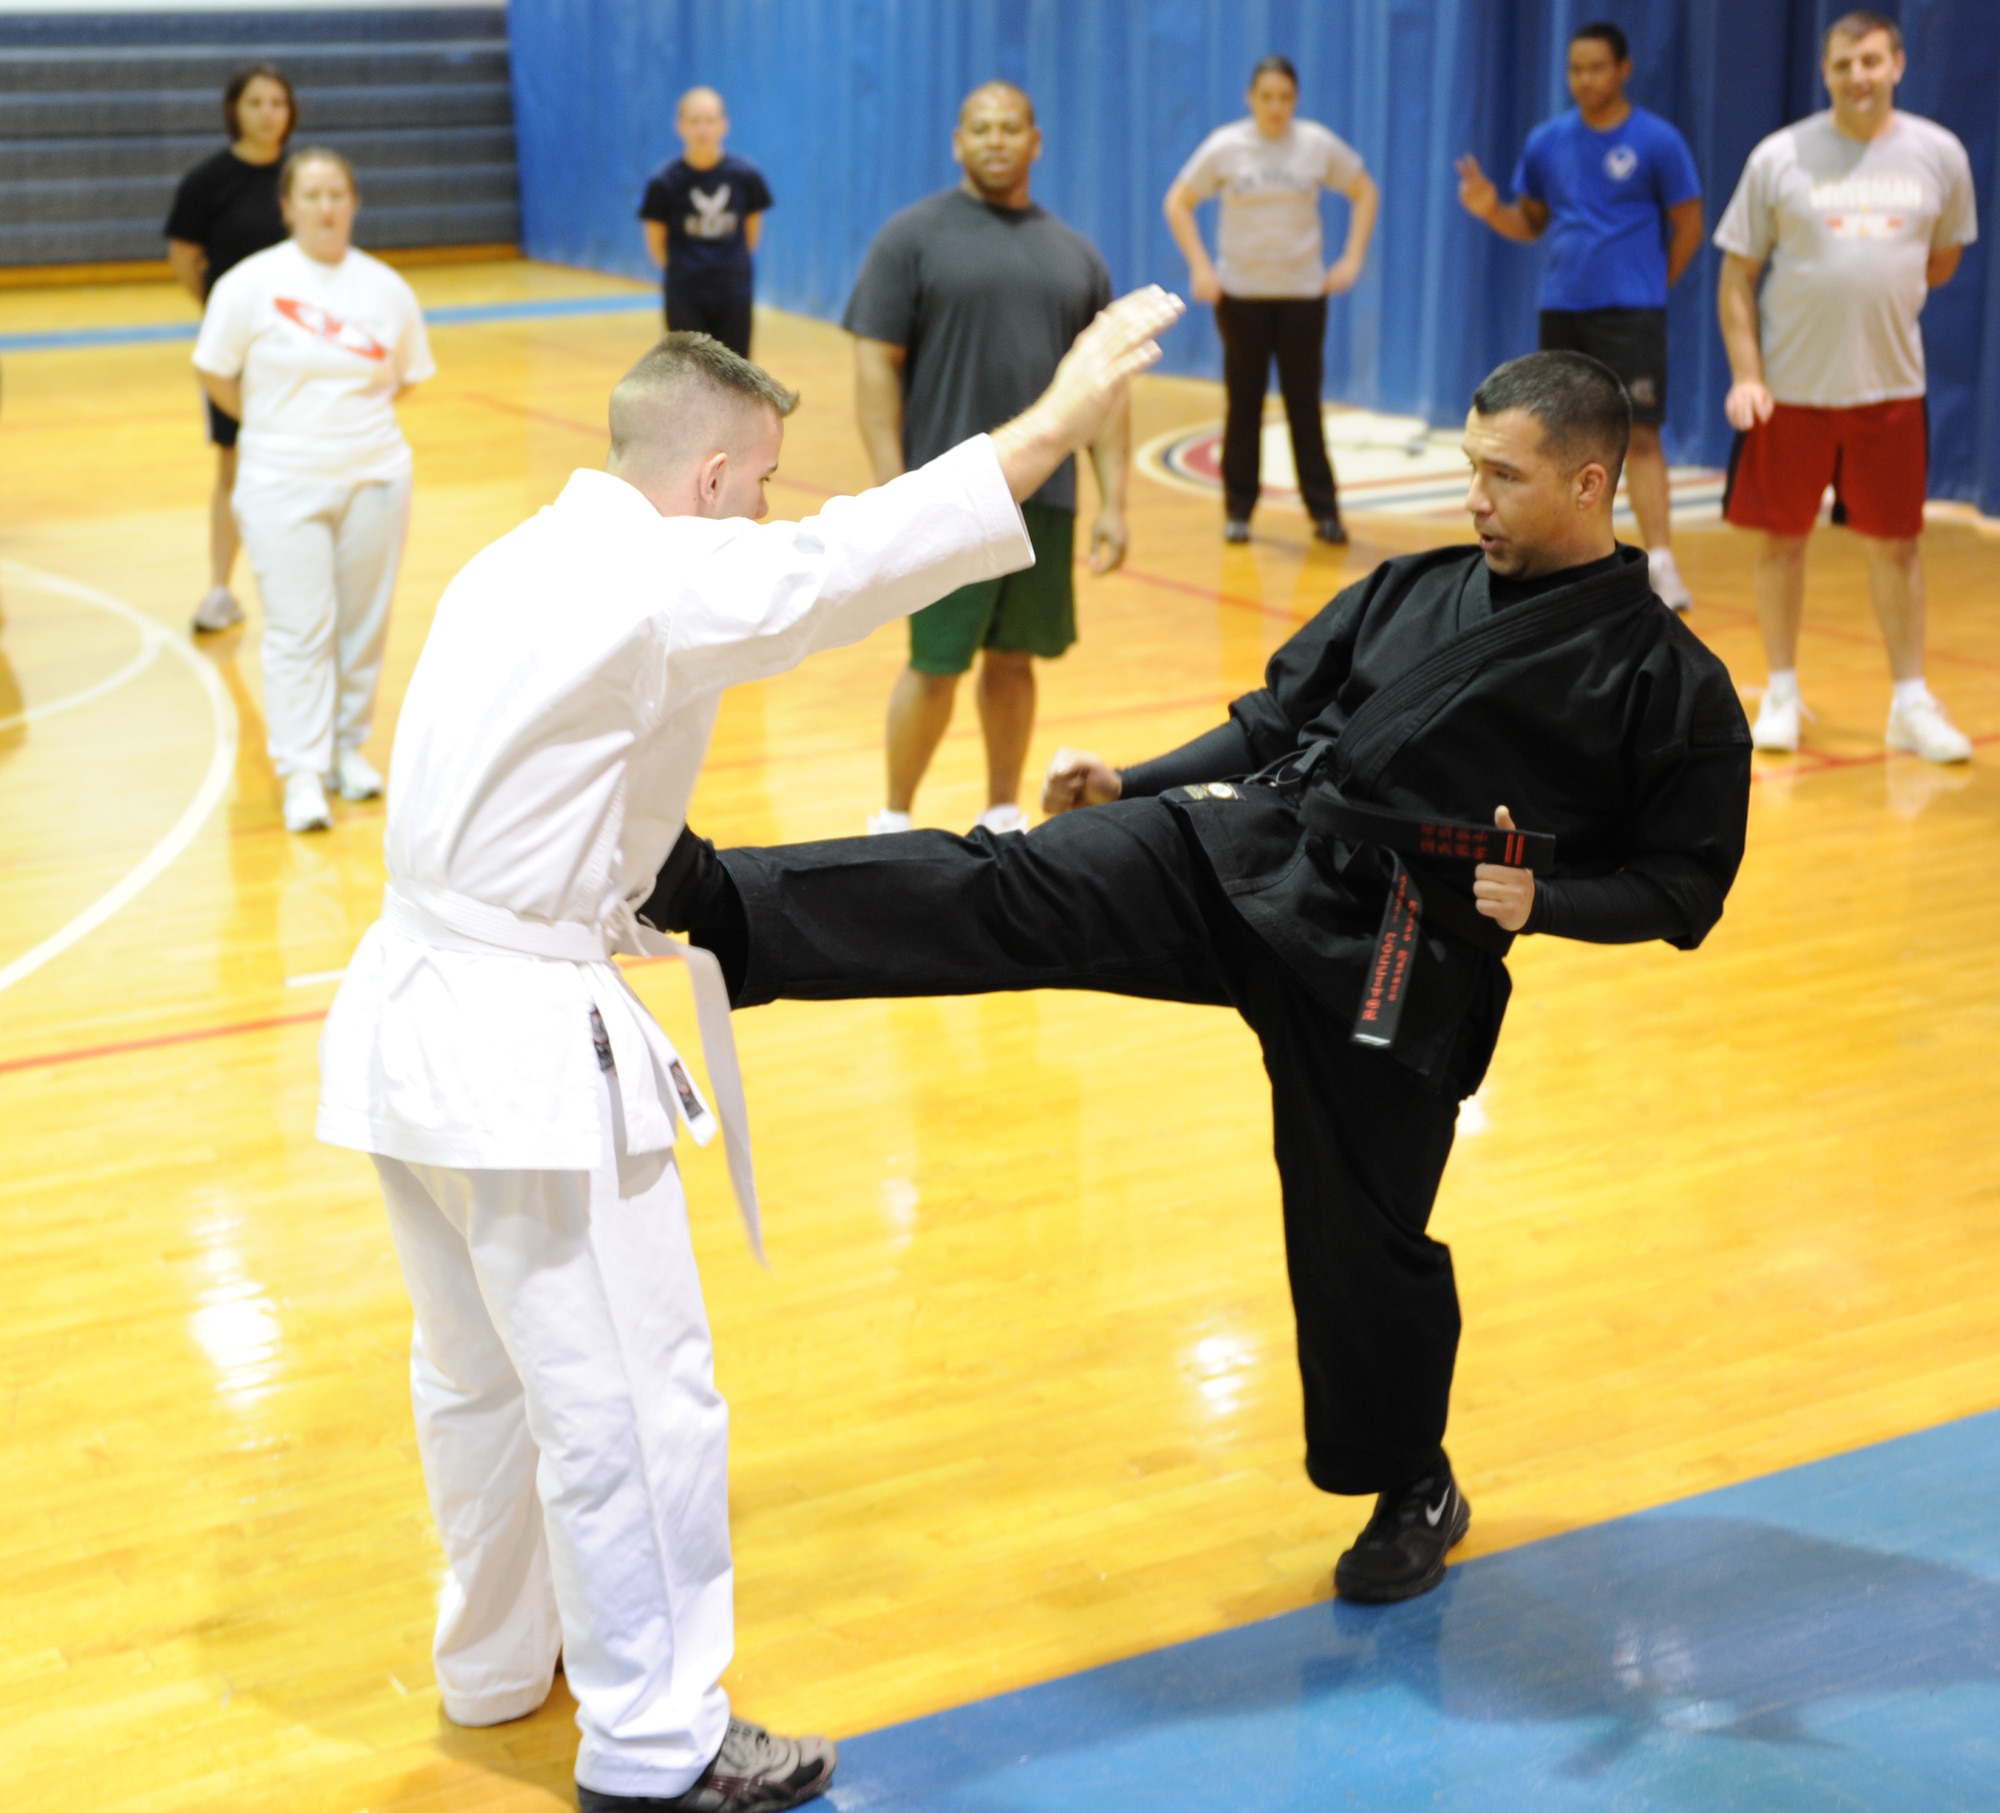 WHITEMAN AIR FORCE BASE, MO. – Sensei Larry Tolliver, Kenpo Instructor, kicks Senior Airman Cory Todd, a Kenpo student and member of the 509th Bomb Wing Public Affairs, during a demonstration for his class Feb. 2. Kenpo is a Japanese term that translates to mean “Law of the Fist.” Classes are Mondays and Wednesdays from 5 – 6 p.m. at the fitness center for $8 a class. (U.S. Air Force photo/Senior Airman Stephen Linch)